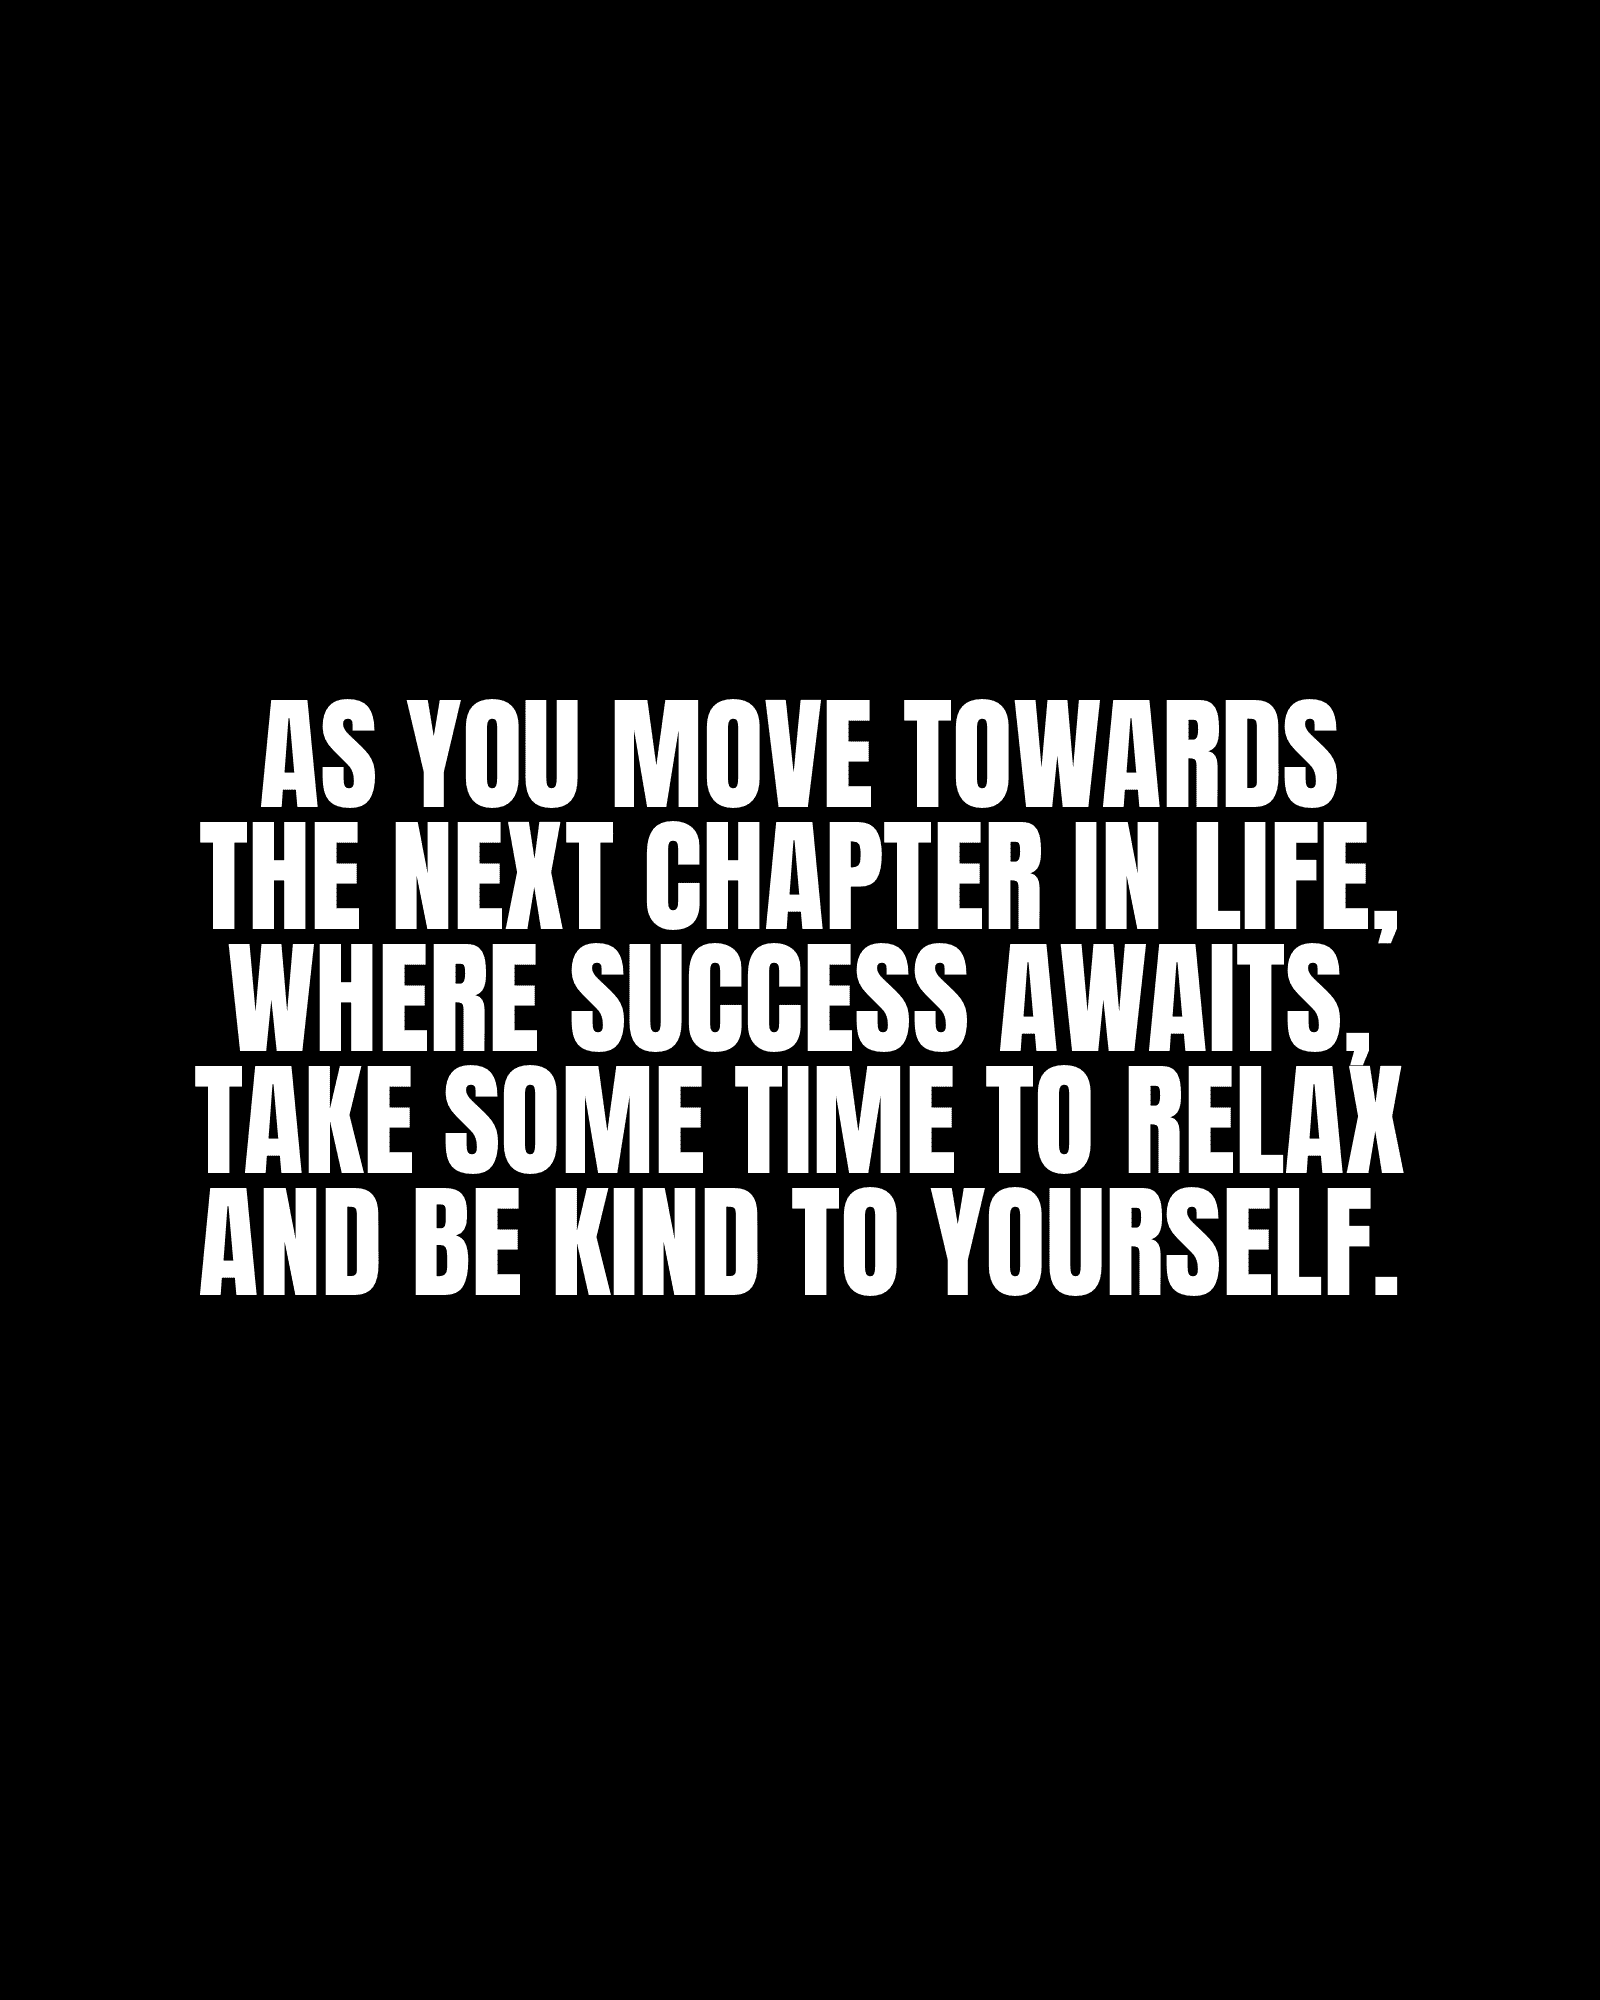 As you move towards the next chapter in life, where success awaits, take some time to relax and be kind to yourself.